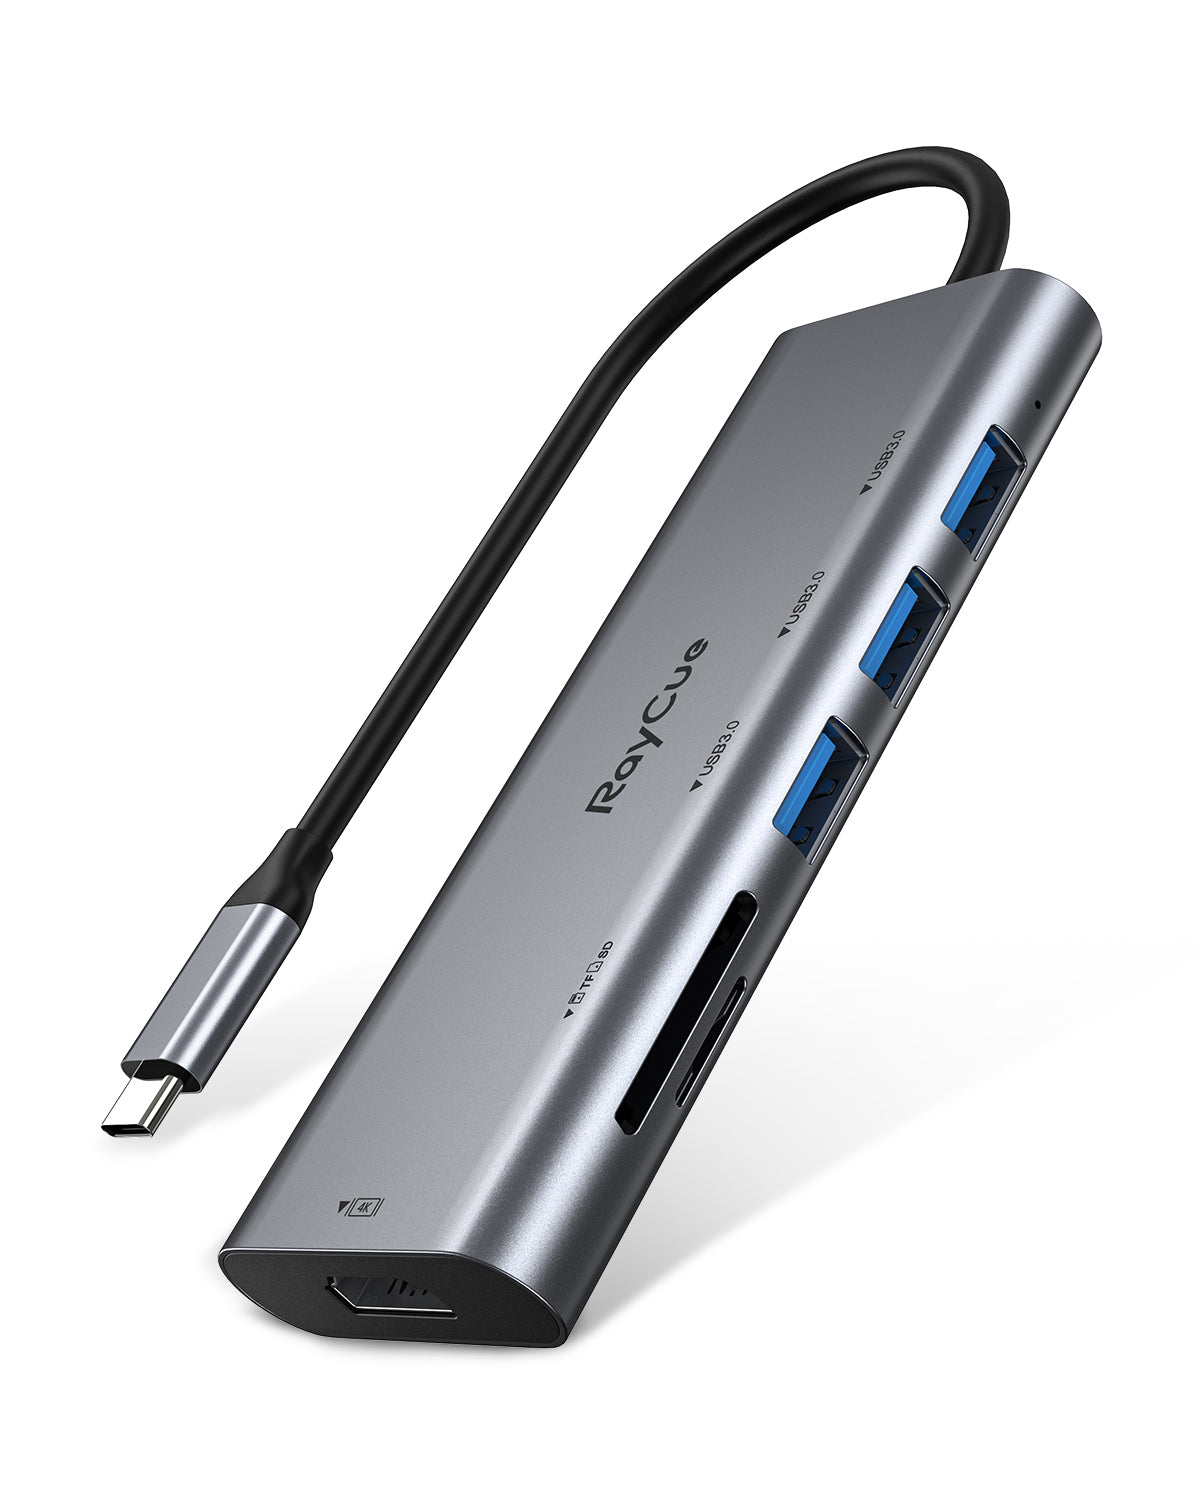 RayCue ExpandPro Prime 6-in-1 USB-C Hub for laptops/tablets